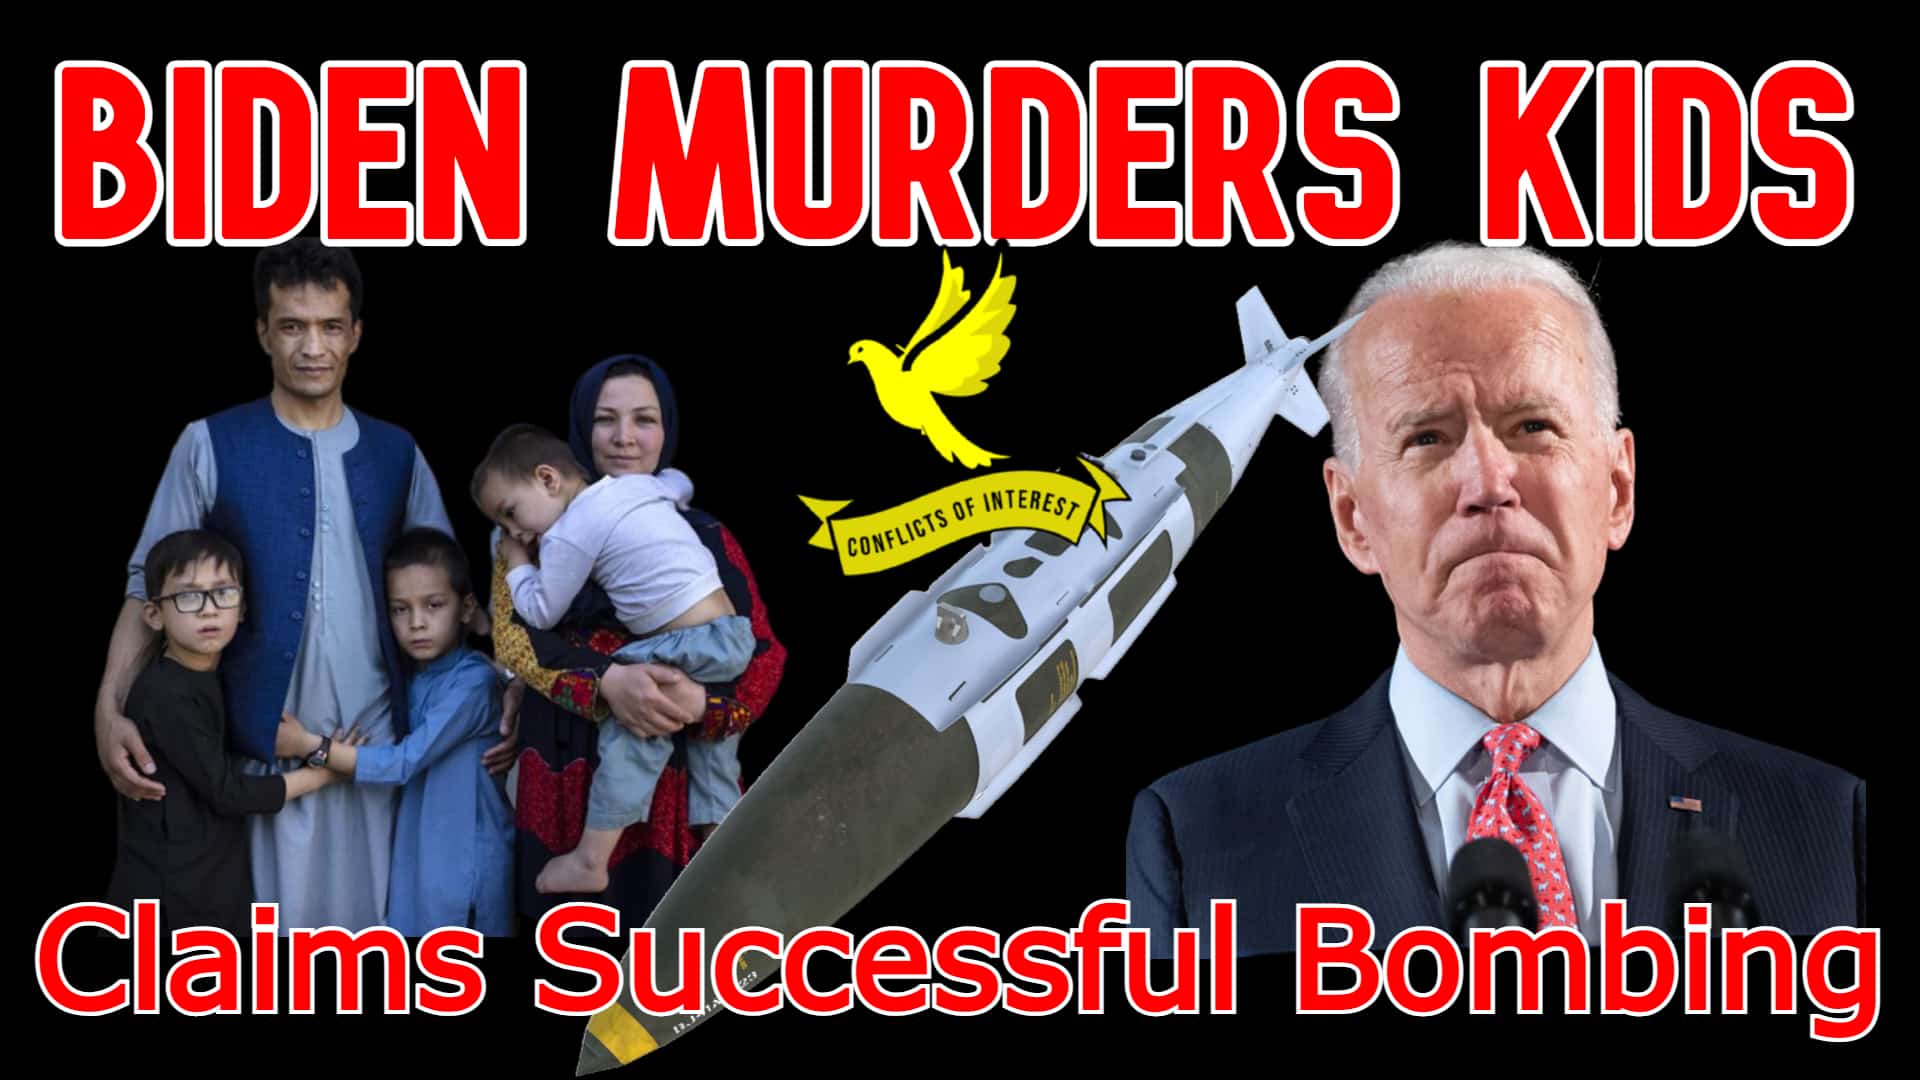 COI #158: Afghan Kids Killed By US Bomb, Pentagon Claims “Success”